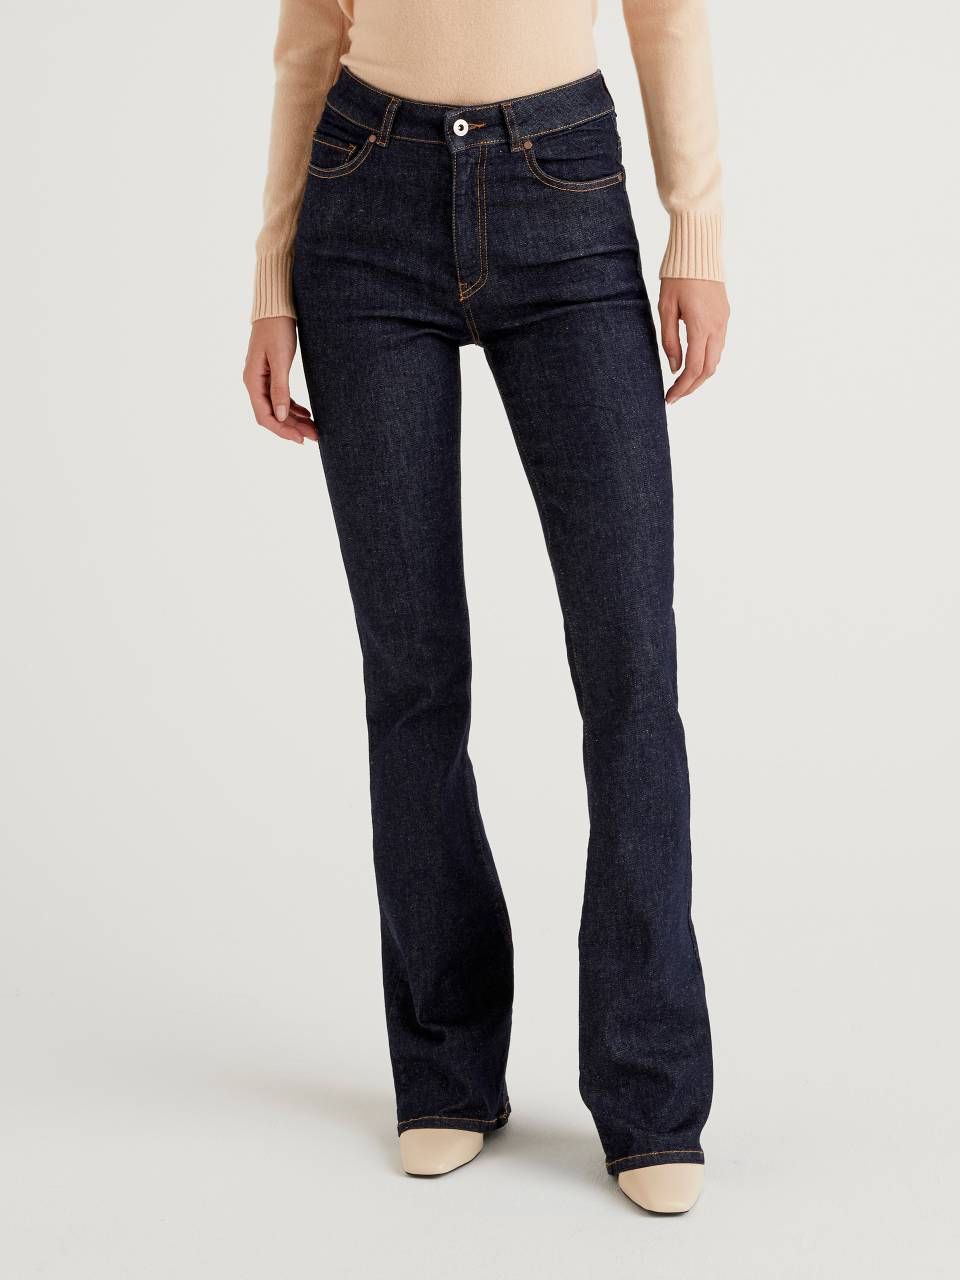 Benetton Stretch flared jeans. 1